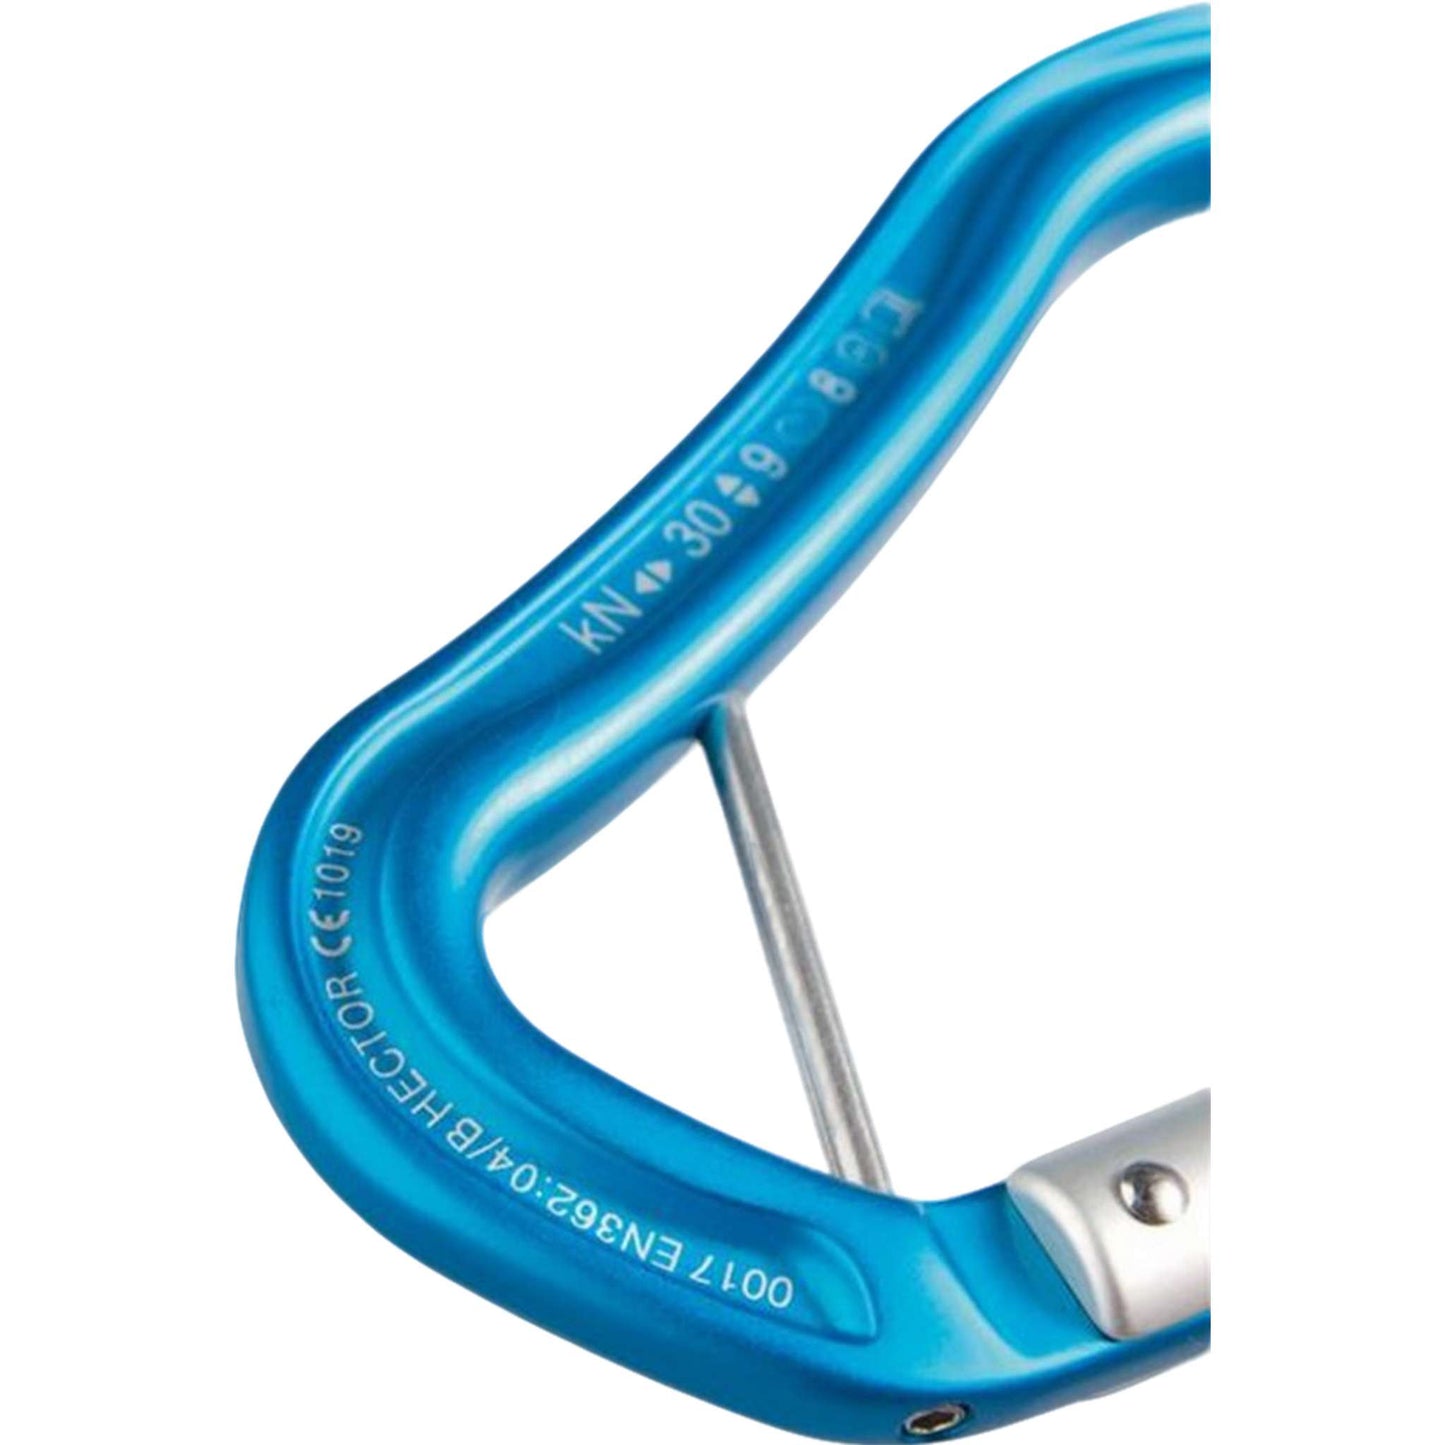 Hector BC Screw HMS Carabiner - Pear-Shaped, High-Strength for Secure Anchoring & Belaying